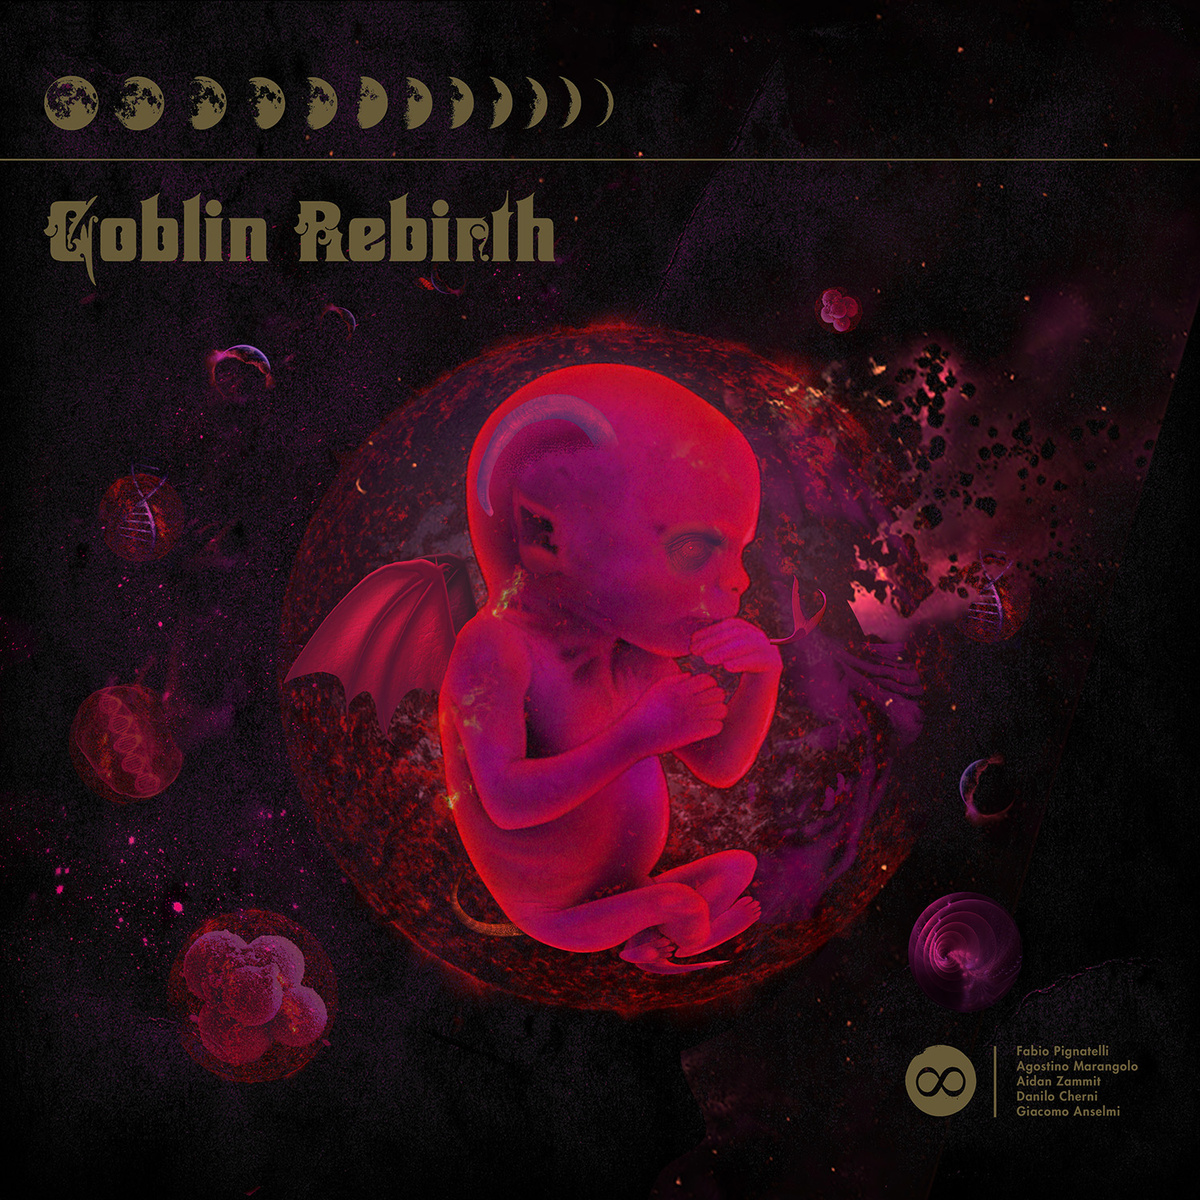 http://bloody-disgusting.com/news/3342308/goblin-rebirth-releases-trailer-upcoming-debut-album/